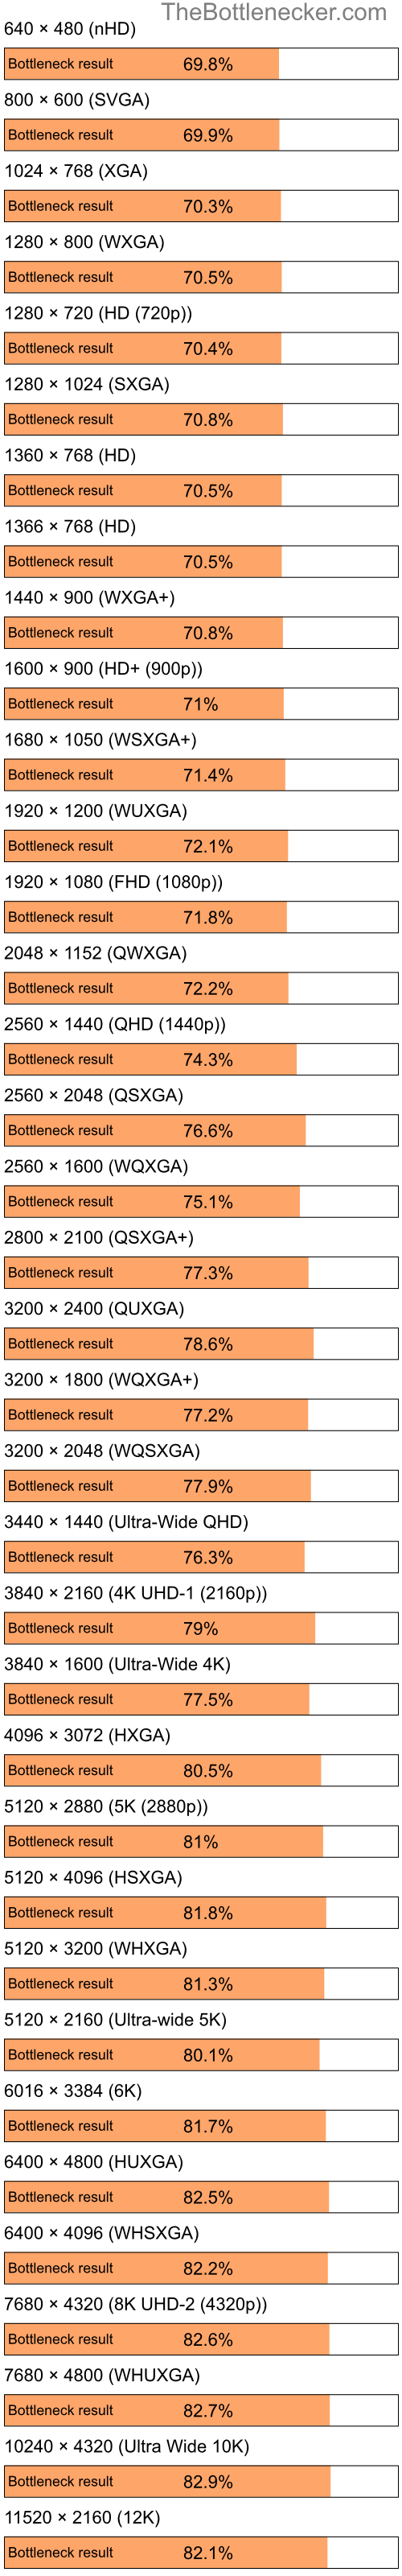 Bottleneck results by resolution for Intel Celeron M 420 and AMD M880G with Mobility Radeon HD 4250 in Graphic Card Intense Tasks